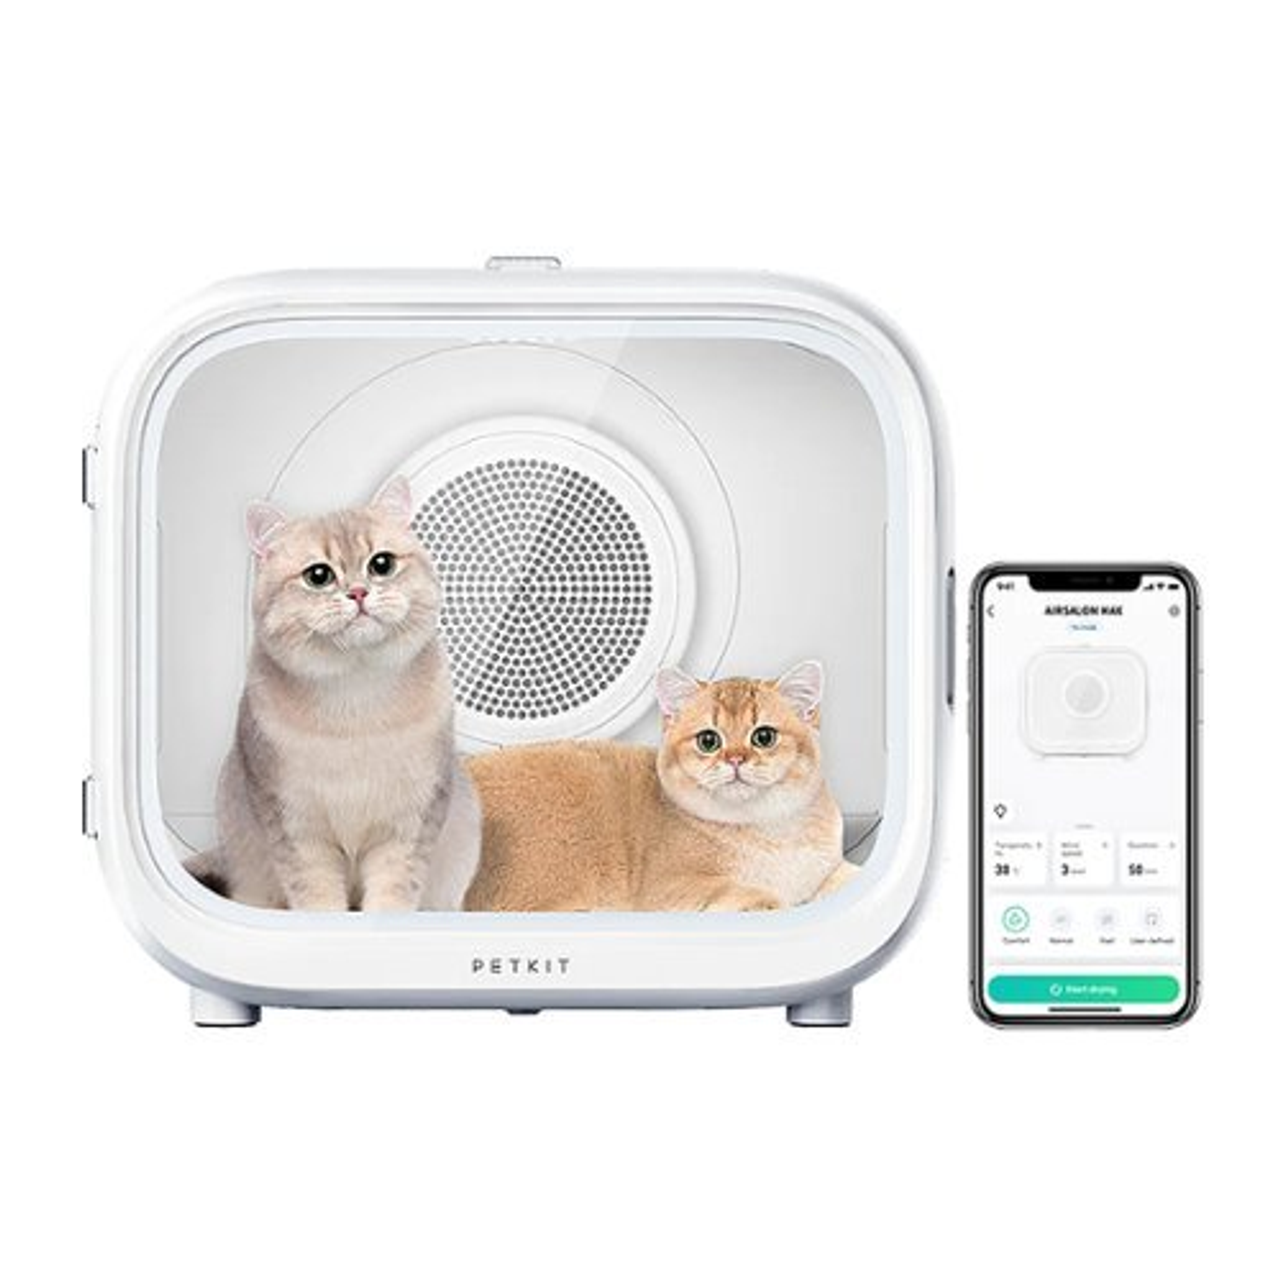 Petkit - AIRSALON MAX PRO Automatic Pet Hair Drying Box for Cats and Dogs with Smart Temp Control via App and Touch Panel - White